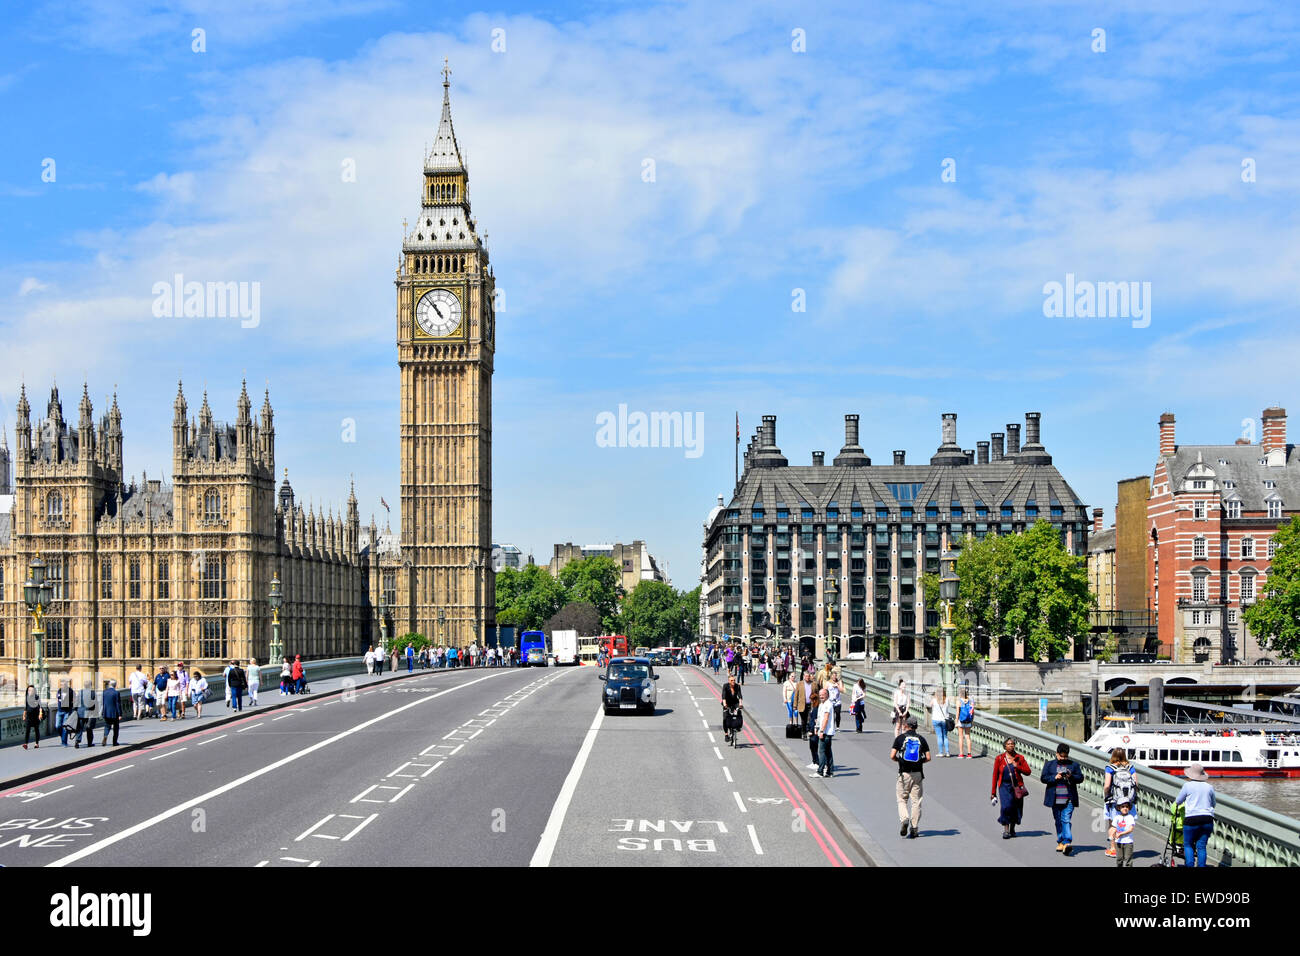 Blue sky looking down on Westminster Bridge with Big Ben Elizabeth clock tower Houses of Parliament and dark MPs Portcullis House London England UK Stock Photo